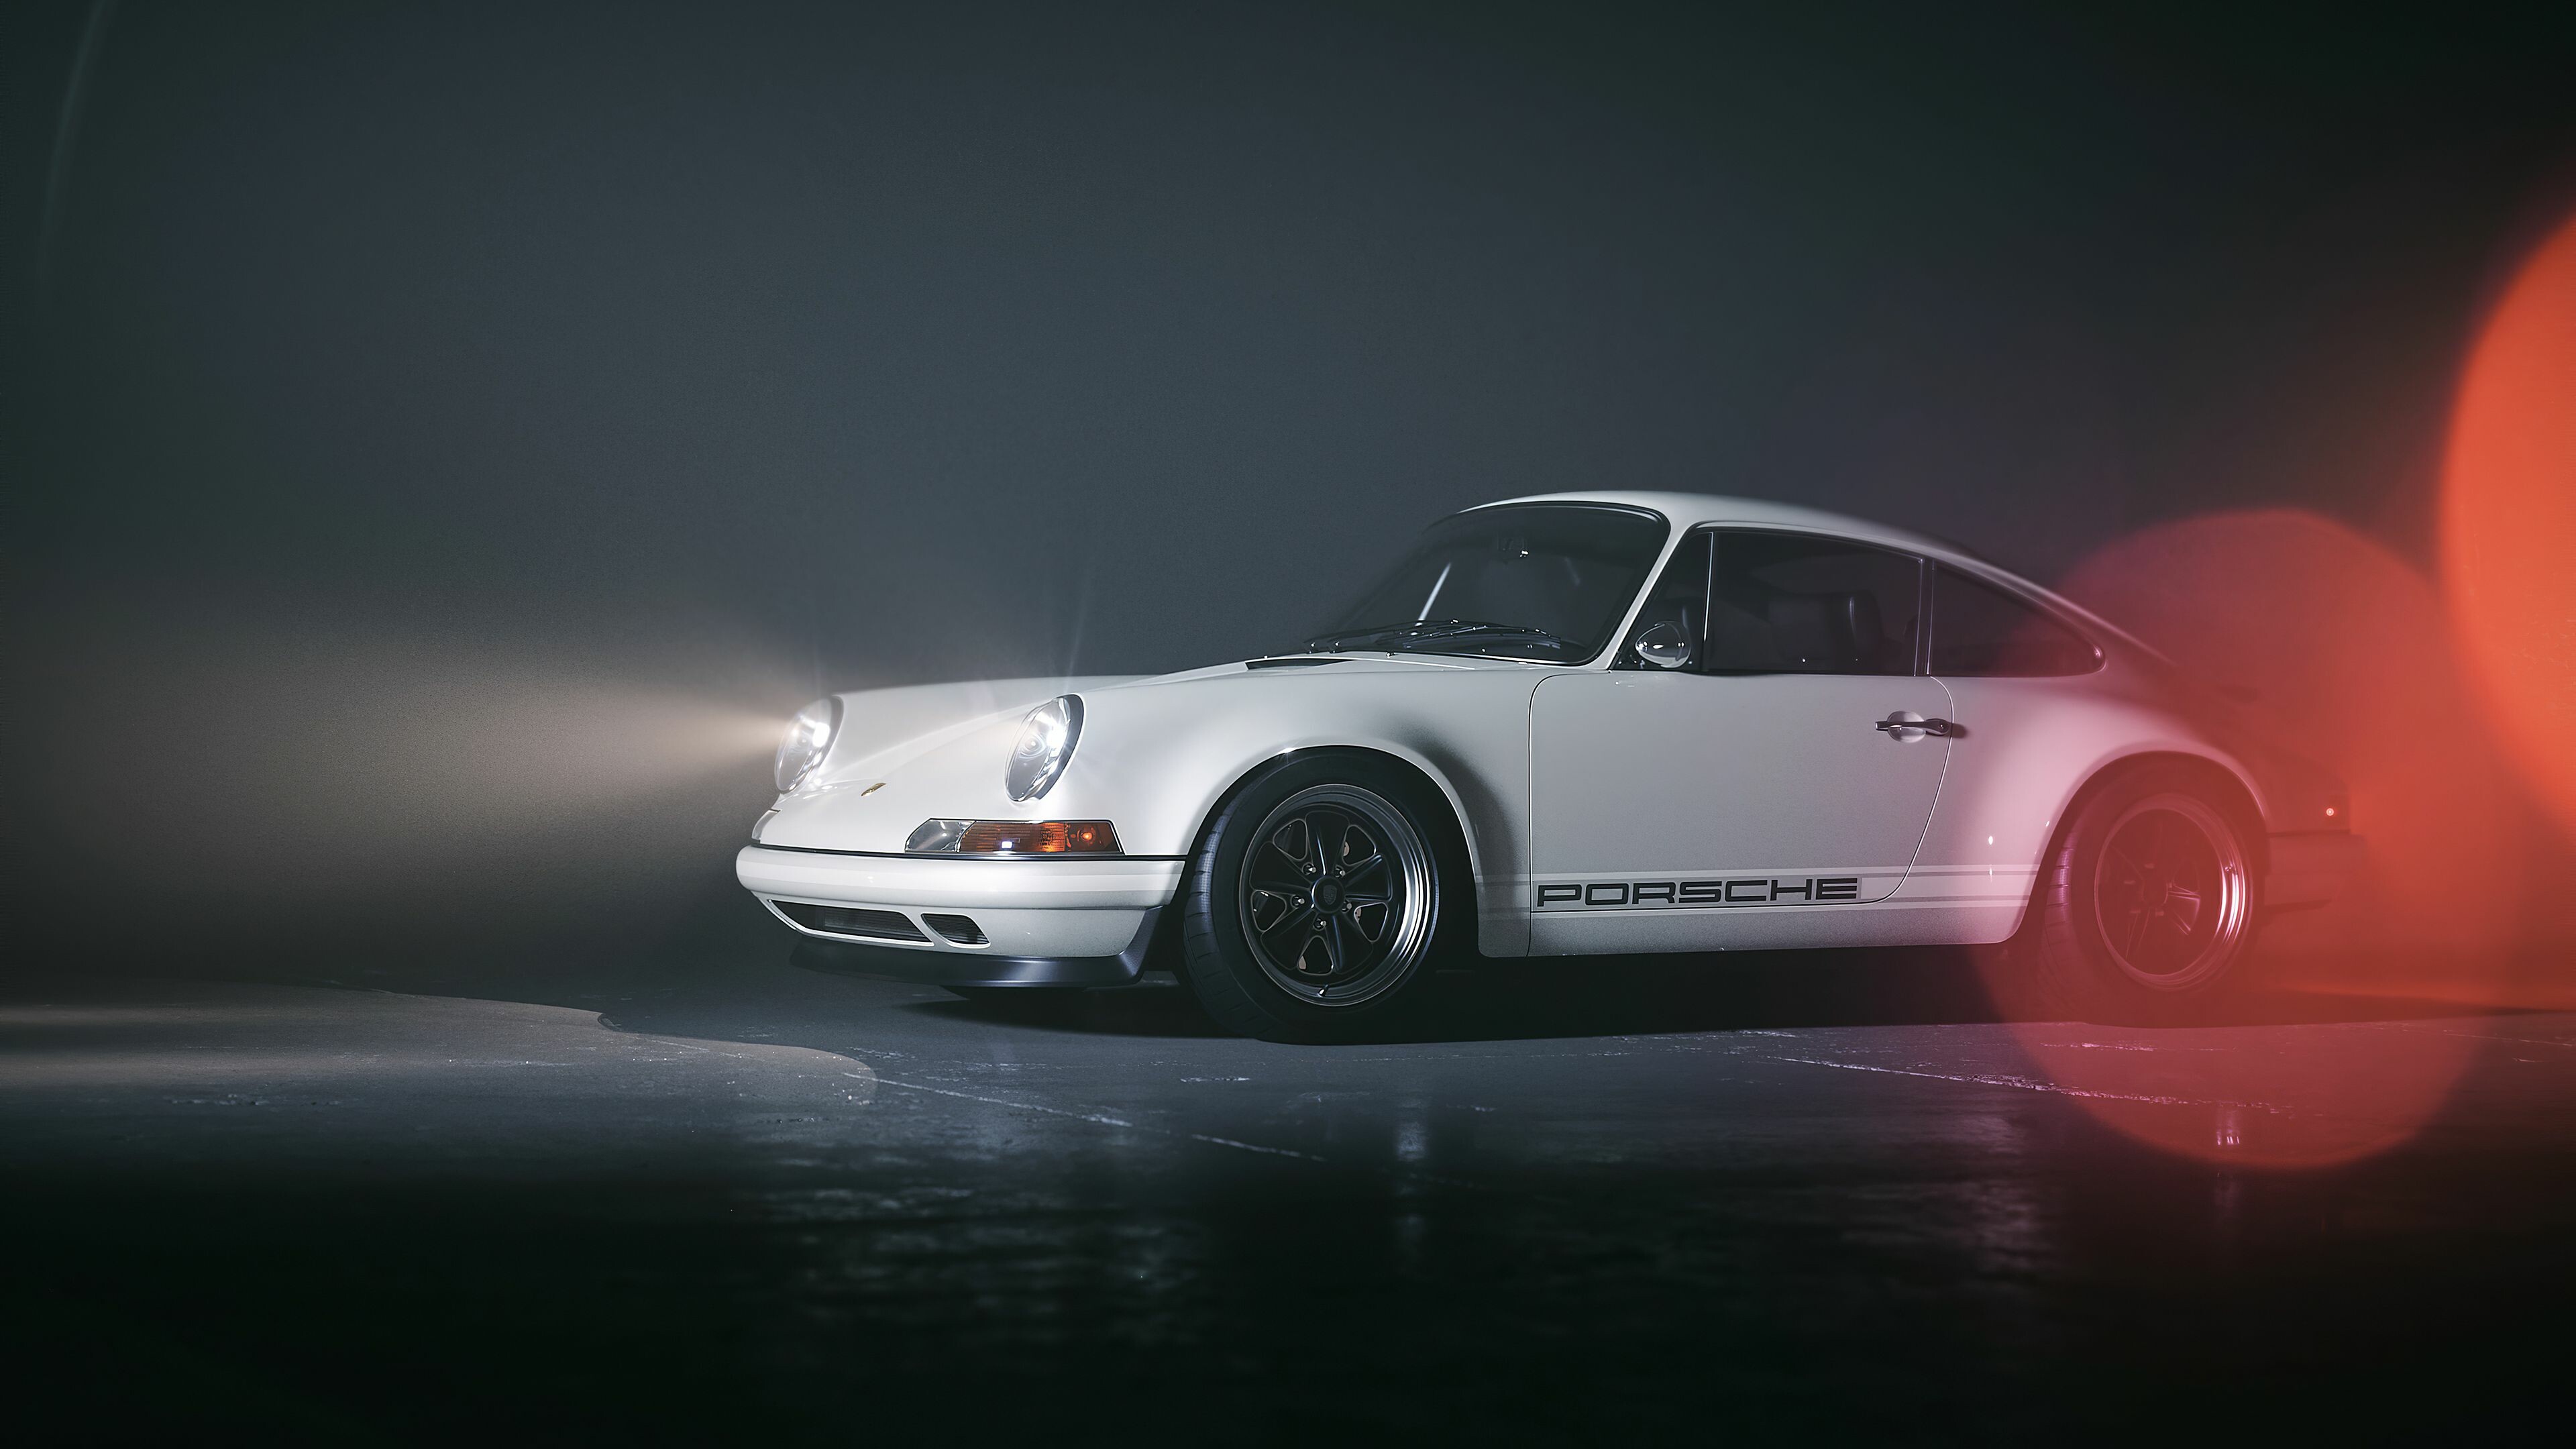 Porsche: 911, A two-door 2+2 high-performance rear-engined sports car introduced in September 1964, Vintage. 3840x2160 4K Background.